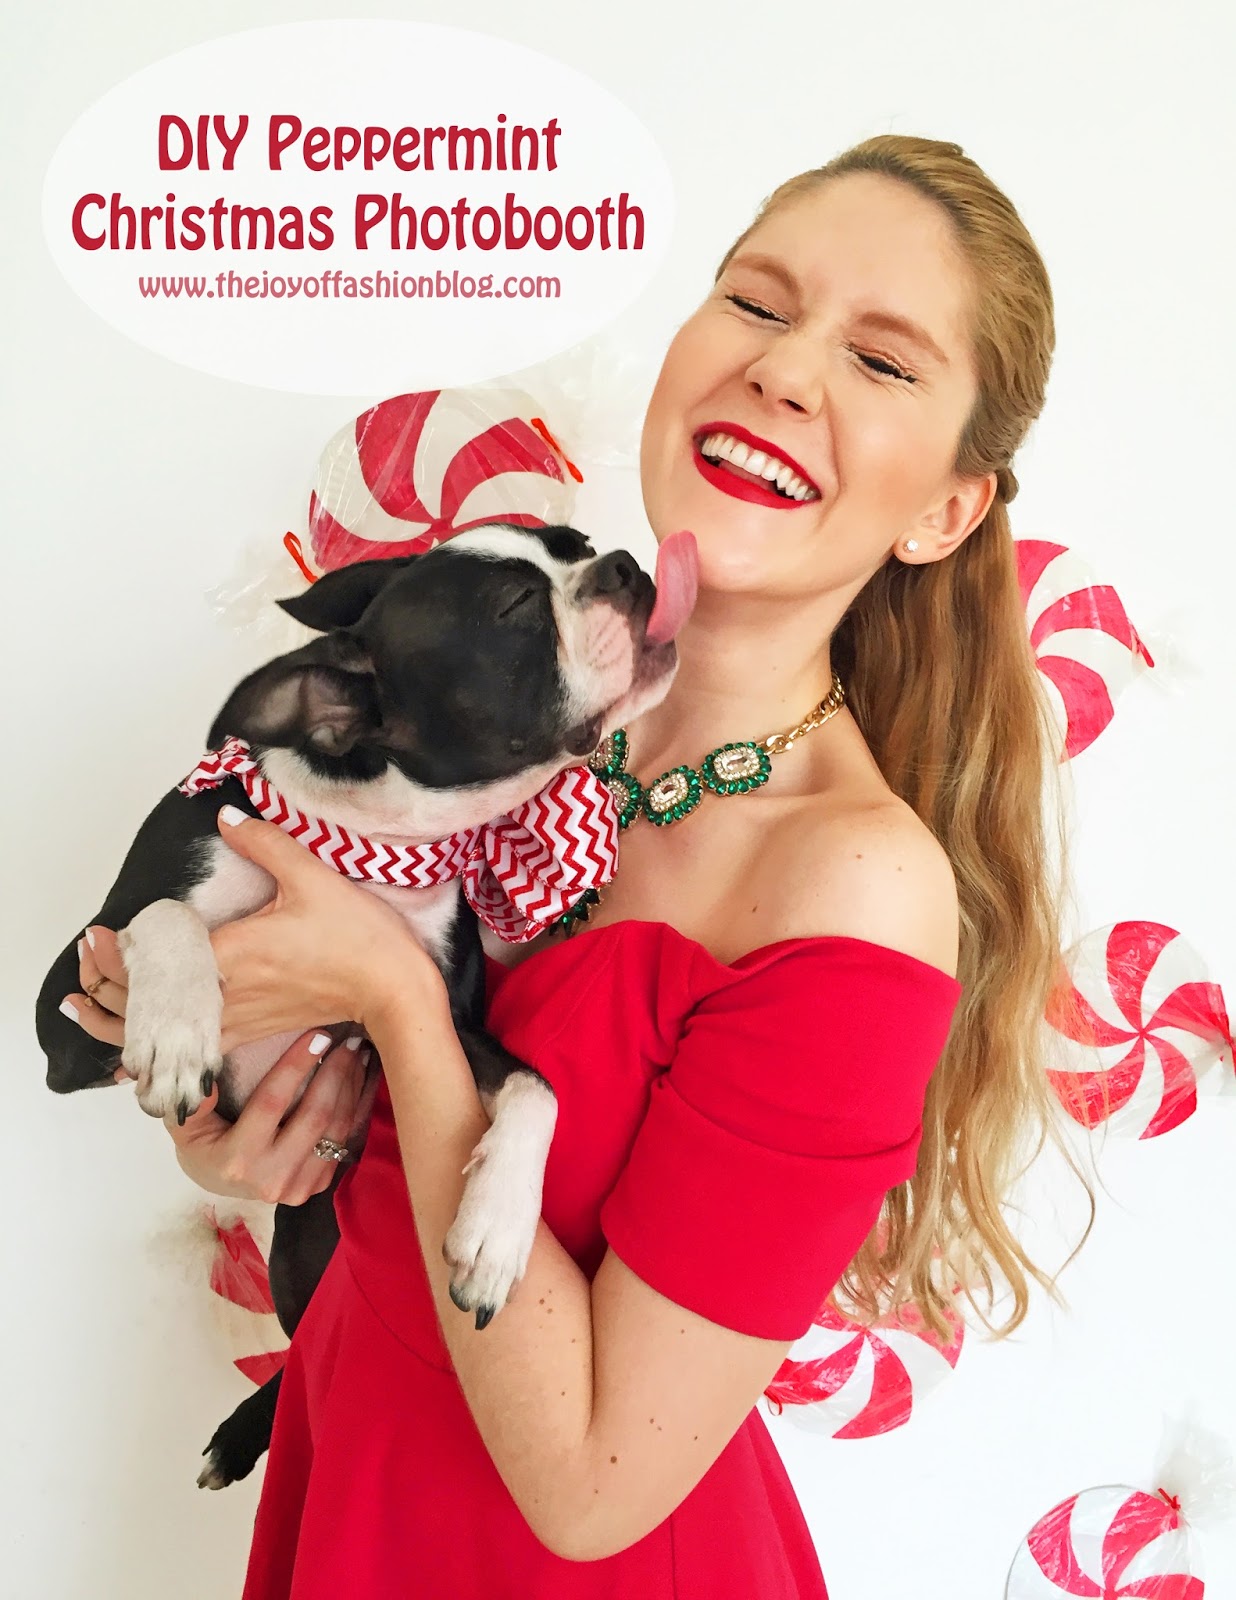 Super cute and easy to make Peppermint photobooth for Christmas! Click through for full tutorial